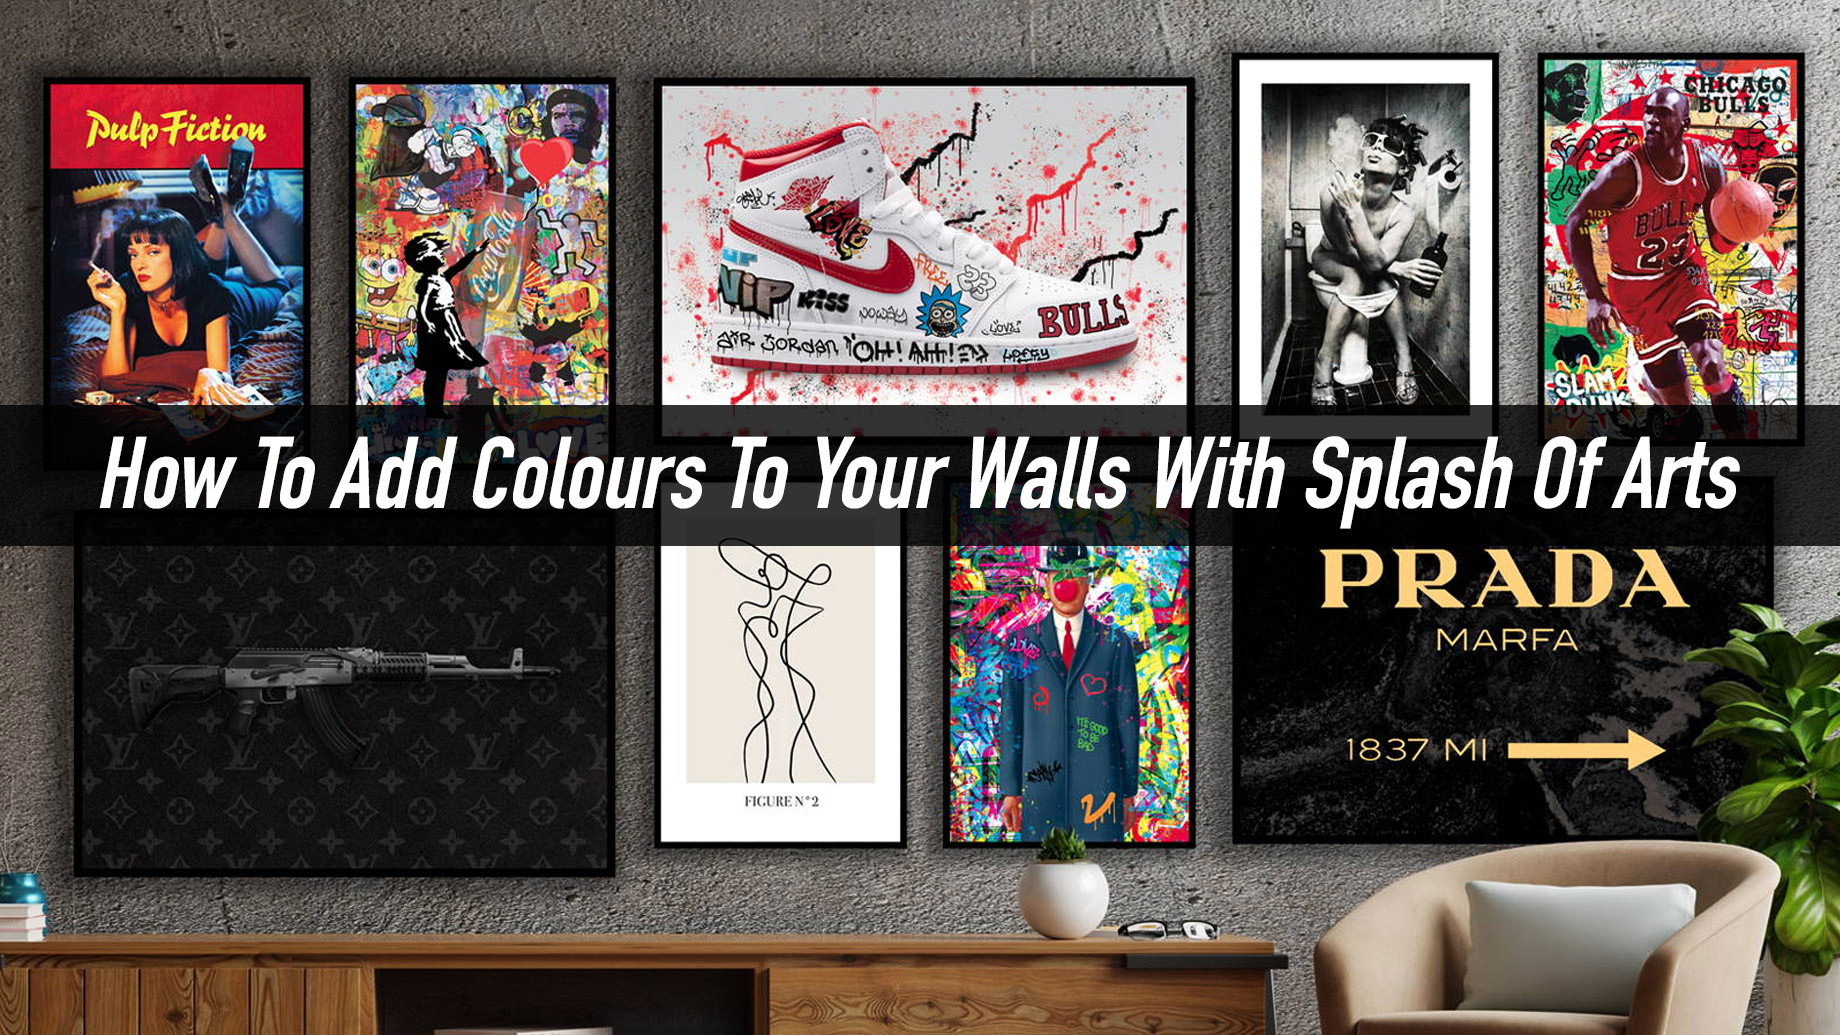 How To Add Colours To Your Walls With Splash Of Arts